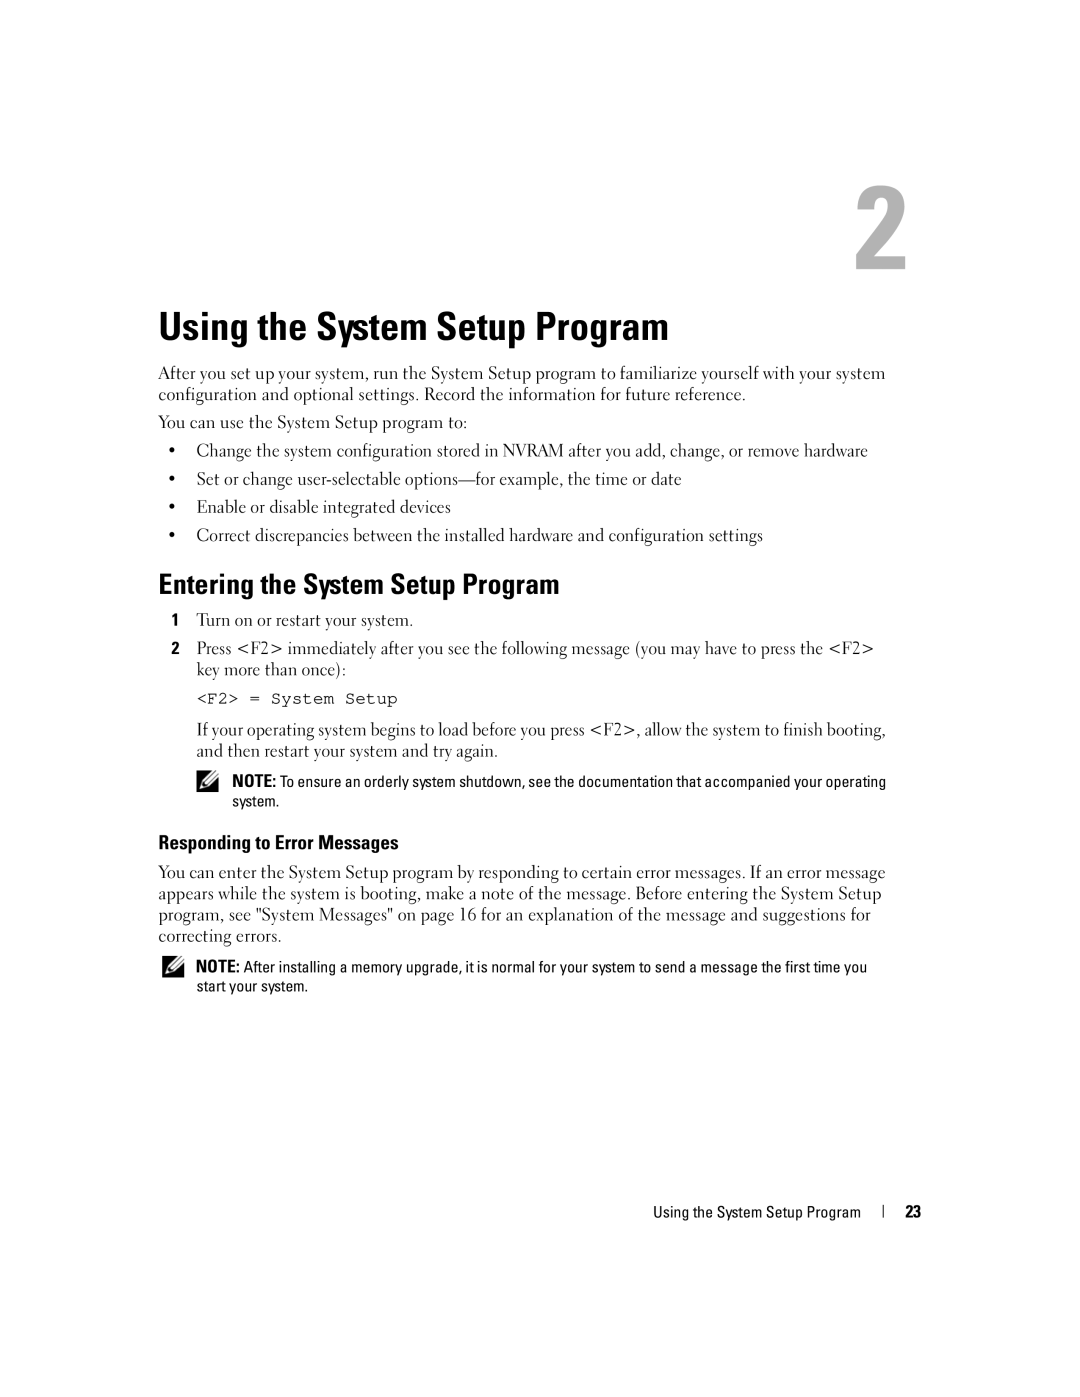 Dell SC1435 owner manual Entering the System Setup Program, Responding to Error Messages, Using the System Setup Program 